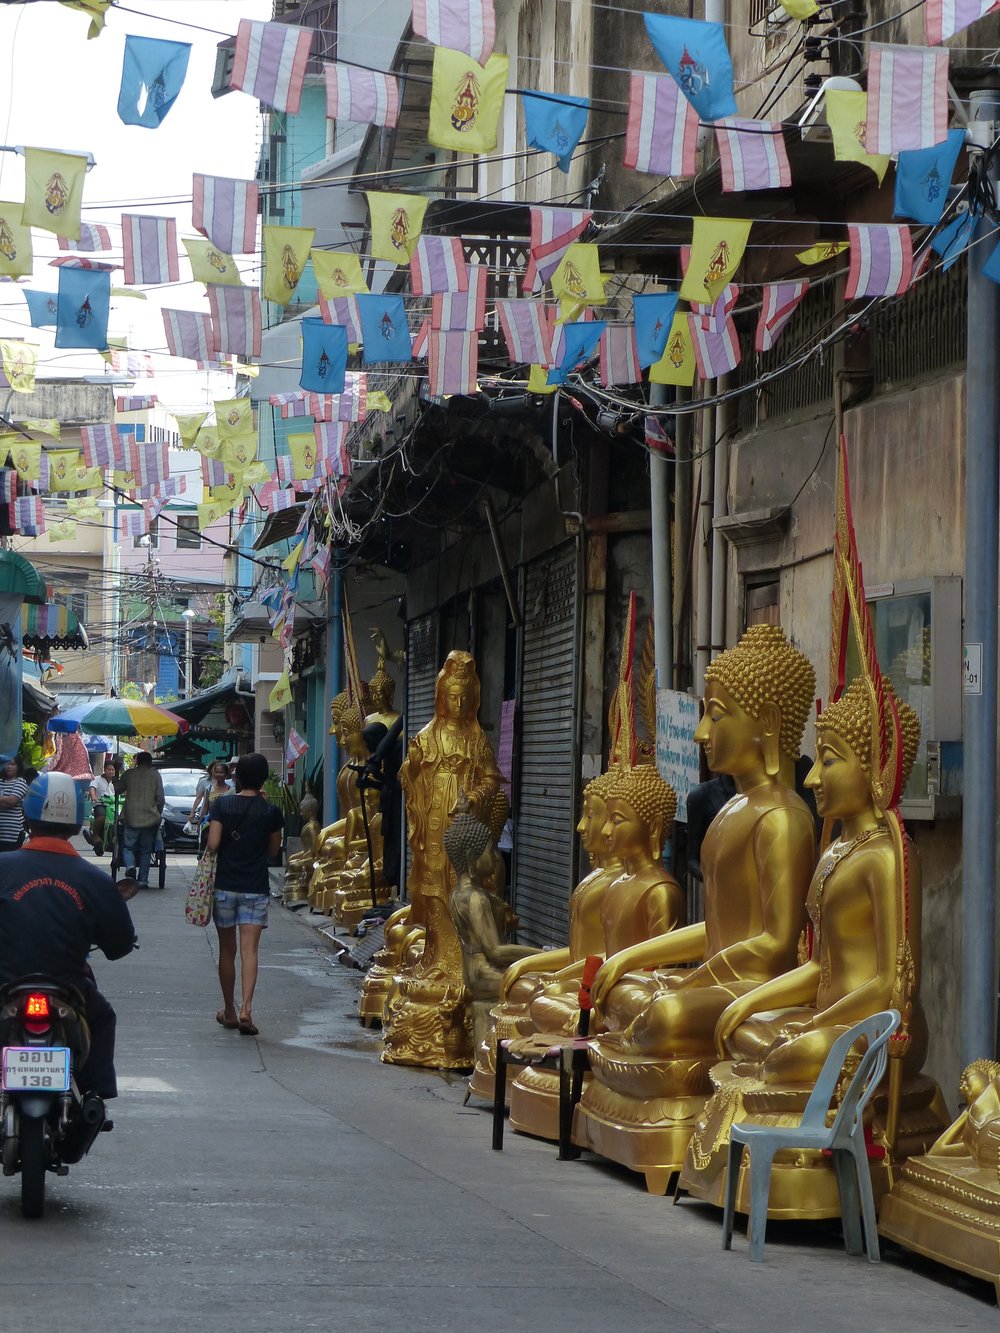 In Bangkok, shops are in districts, this was the shrine district. 